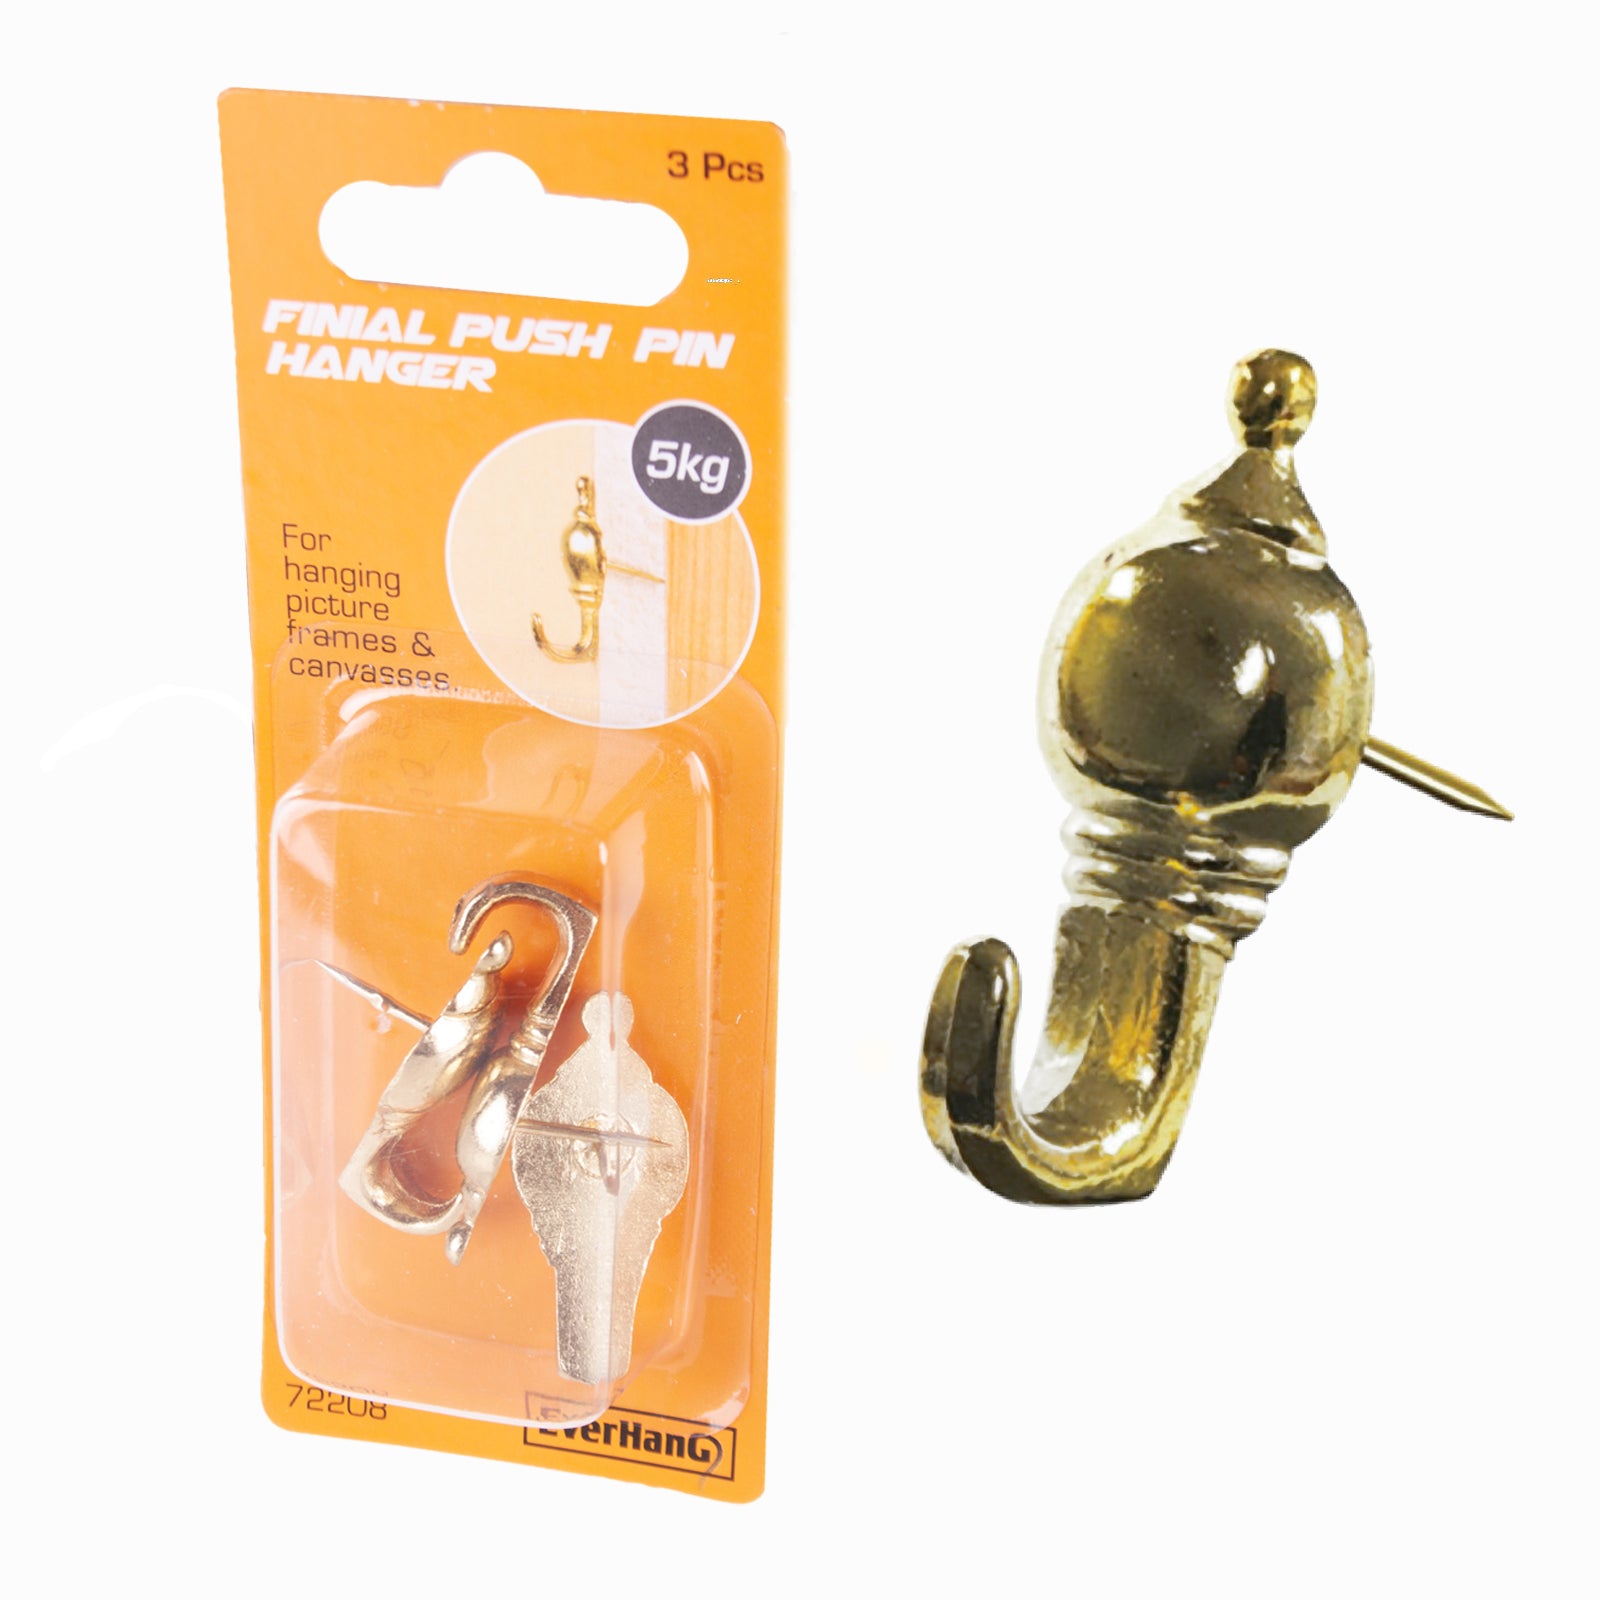 Everhang Brass Plated Small Finial Picture Hanging Push Pins - 3